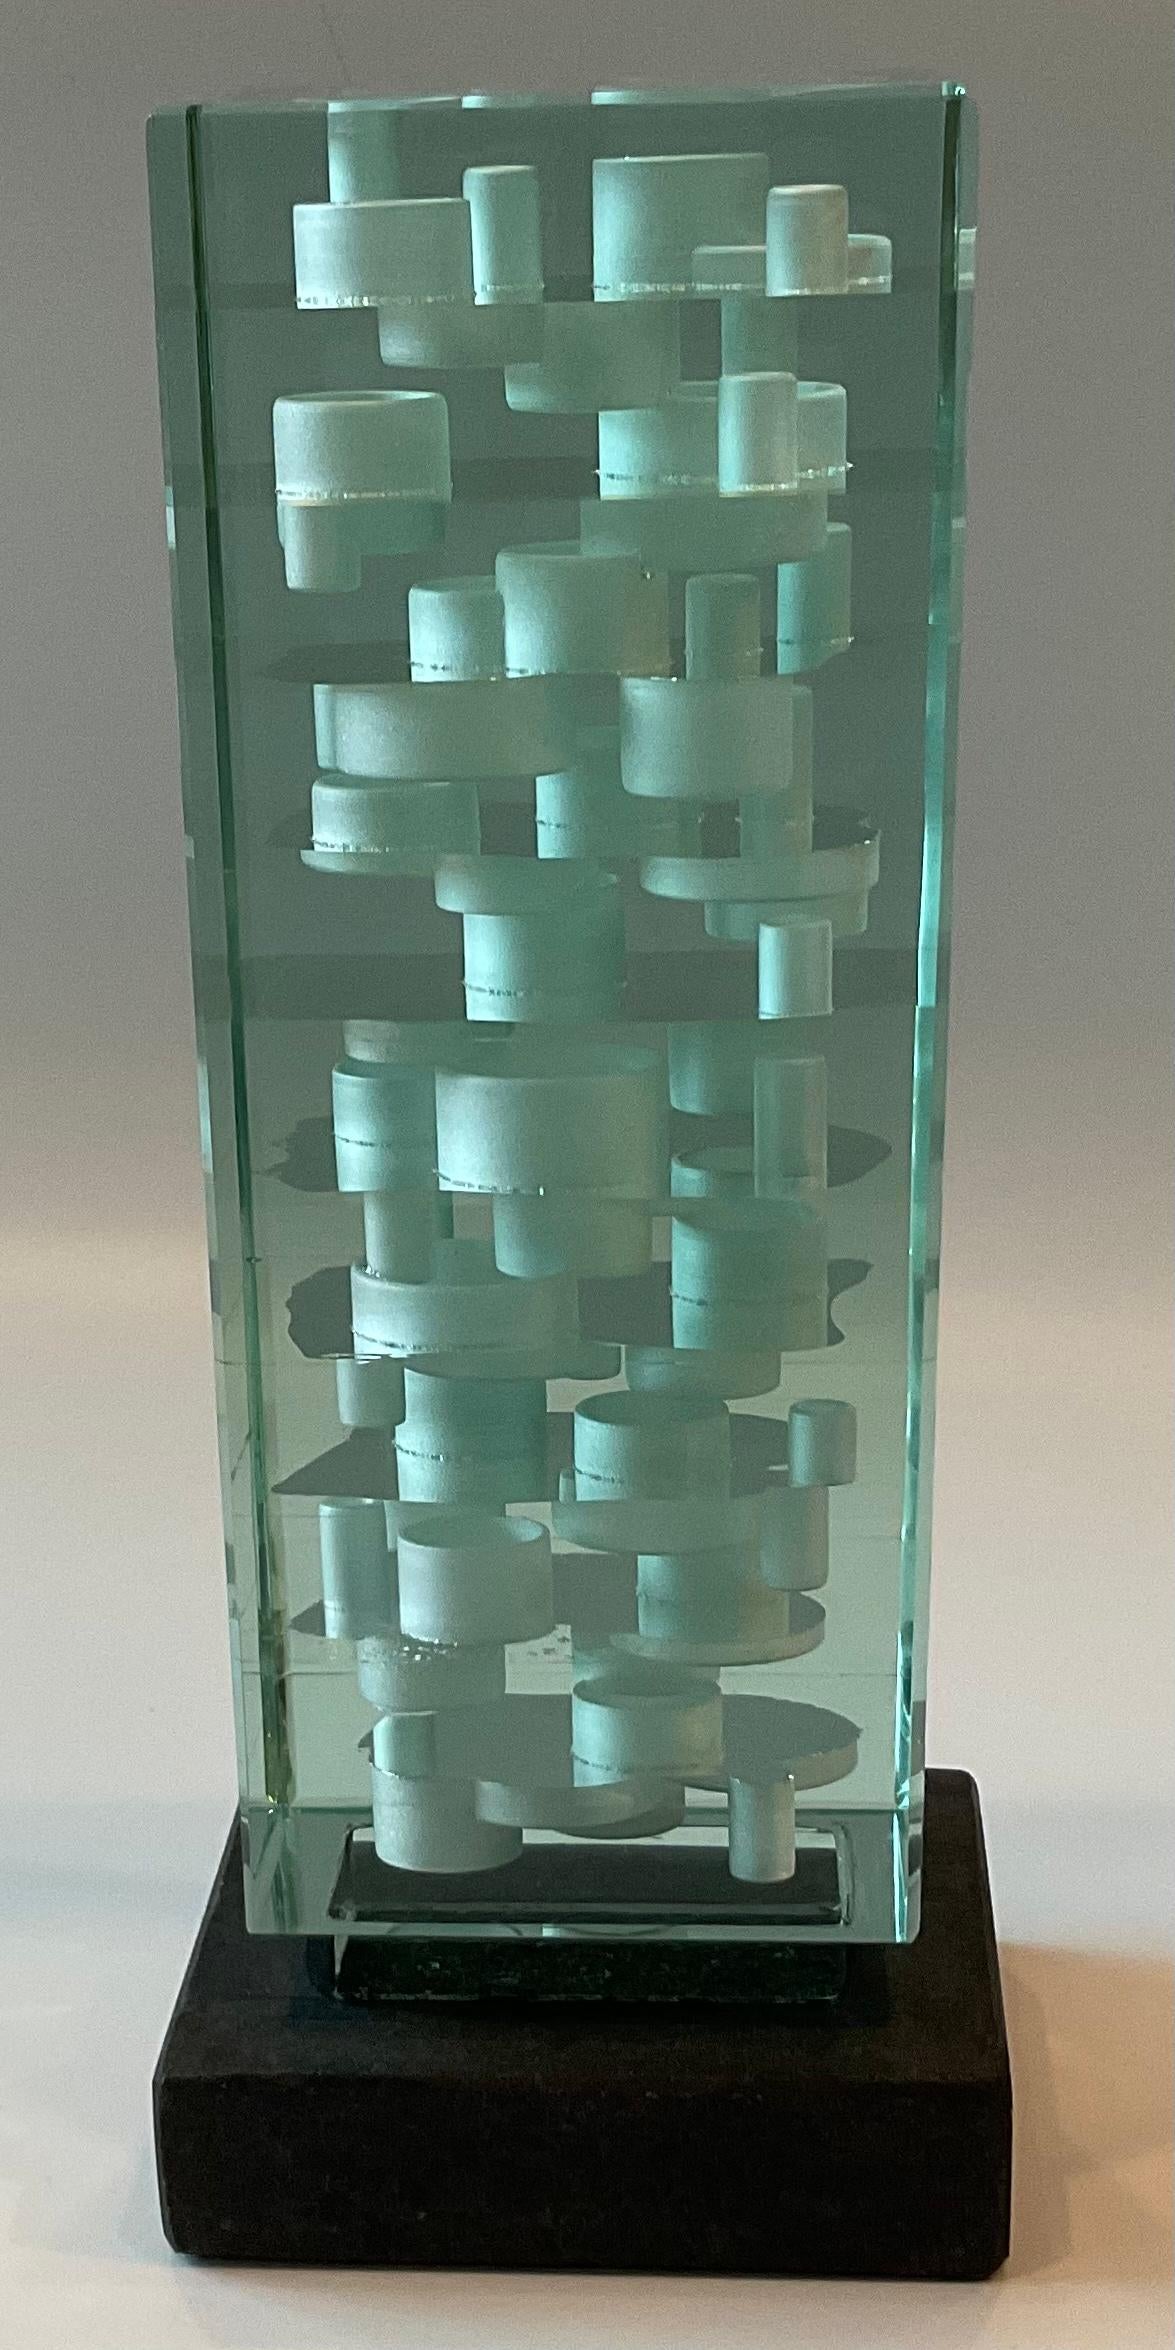 Geometric Abstract Murano Glass Sculpture by Gino Vistosi, 1985 In Good Condition For Sale In Ann Arbor, MI